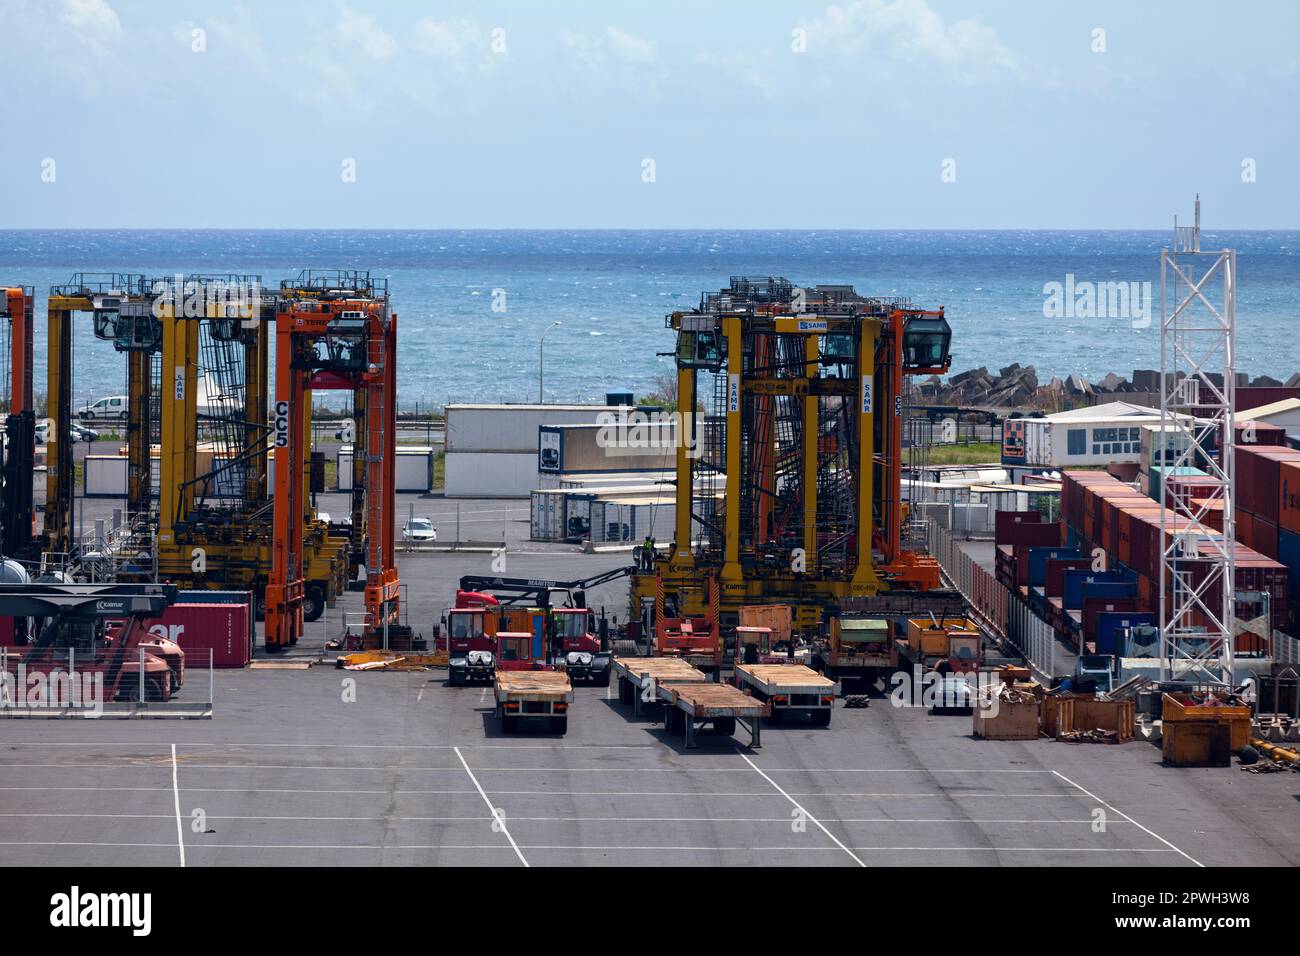 Le Port, Reunion Island - Marsh 08 2017: Container loaders and othe machineries from the Port Réunion Est, a commercial dock located in the seashore c Stock Photo